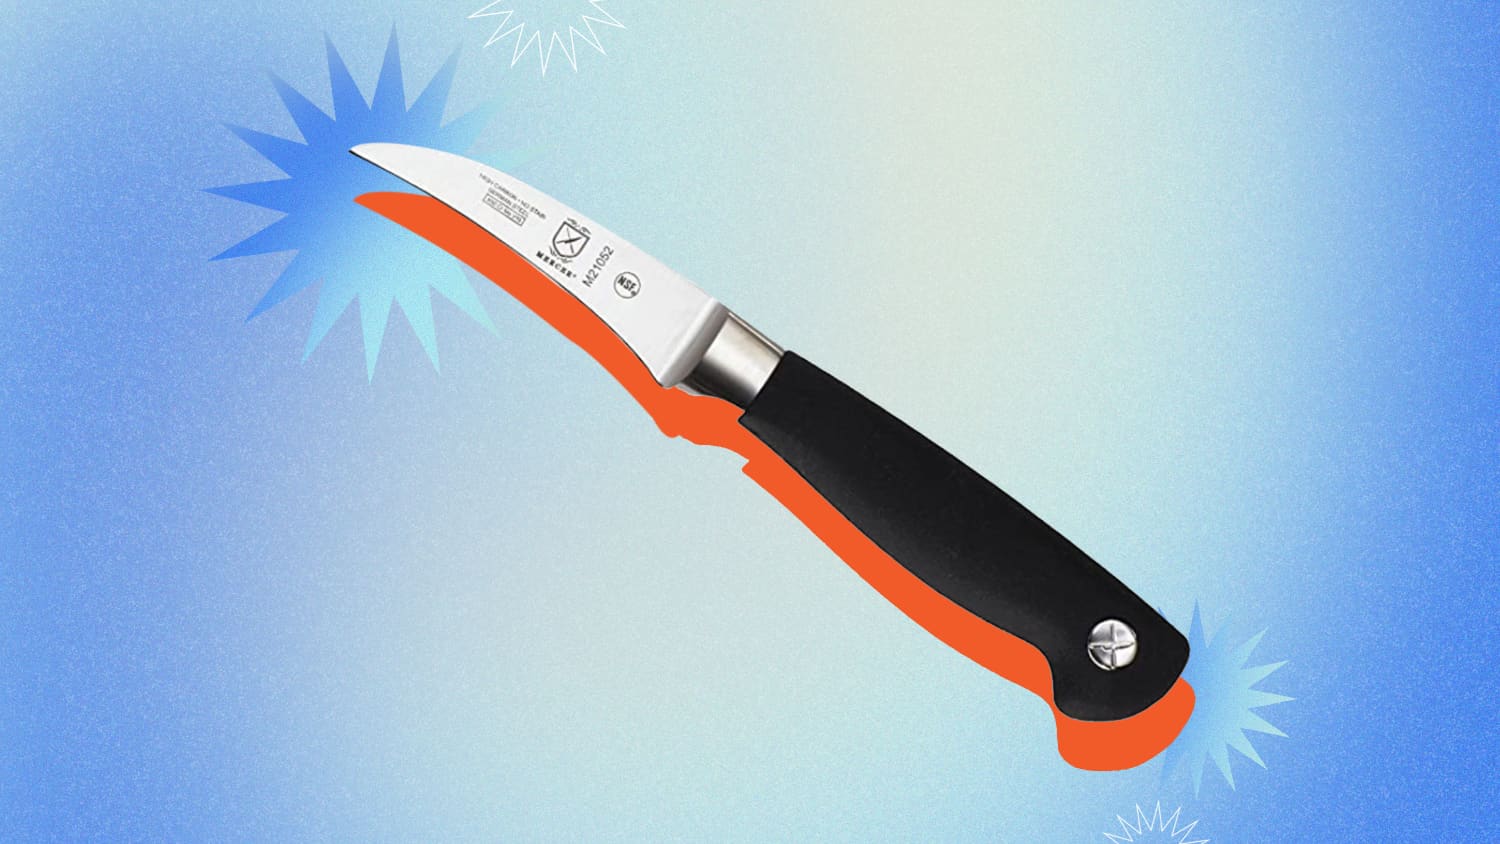 https://cdn.apartmenttherapy.info/image/upload/f_jpg,q_auto:eco,c_fill,g_auto,w_1500,ar_16:9/k%2FDesign%2F2021-02%2Fmercer-knife-review